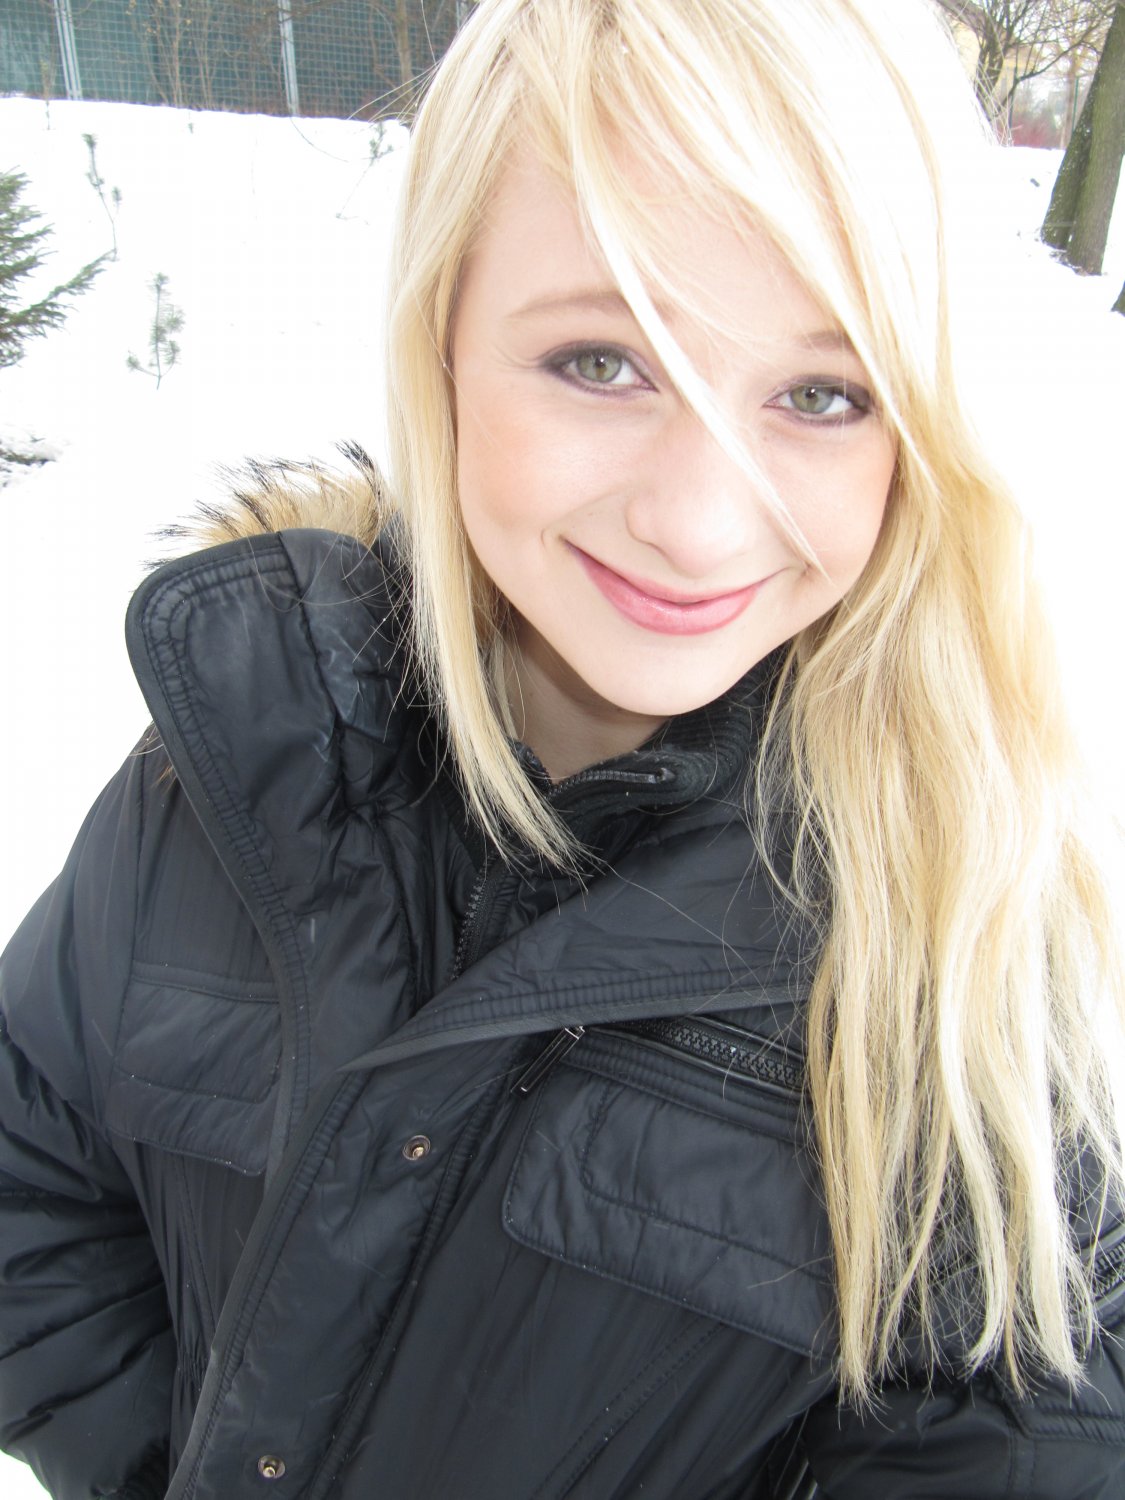 sweet-blonde-teen-shows-her-lovely-tits-and-pussy-in-the-snow-2